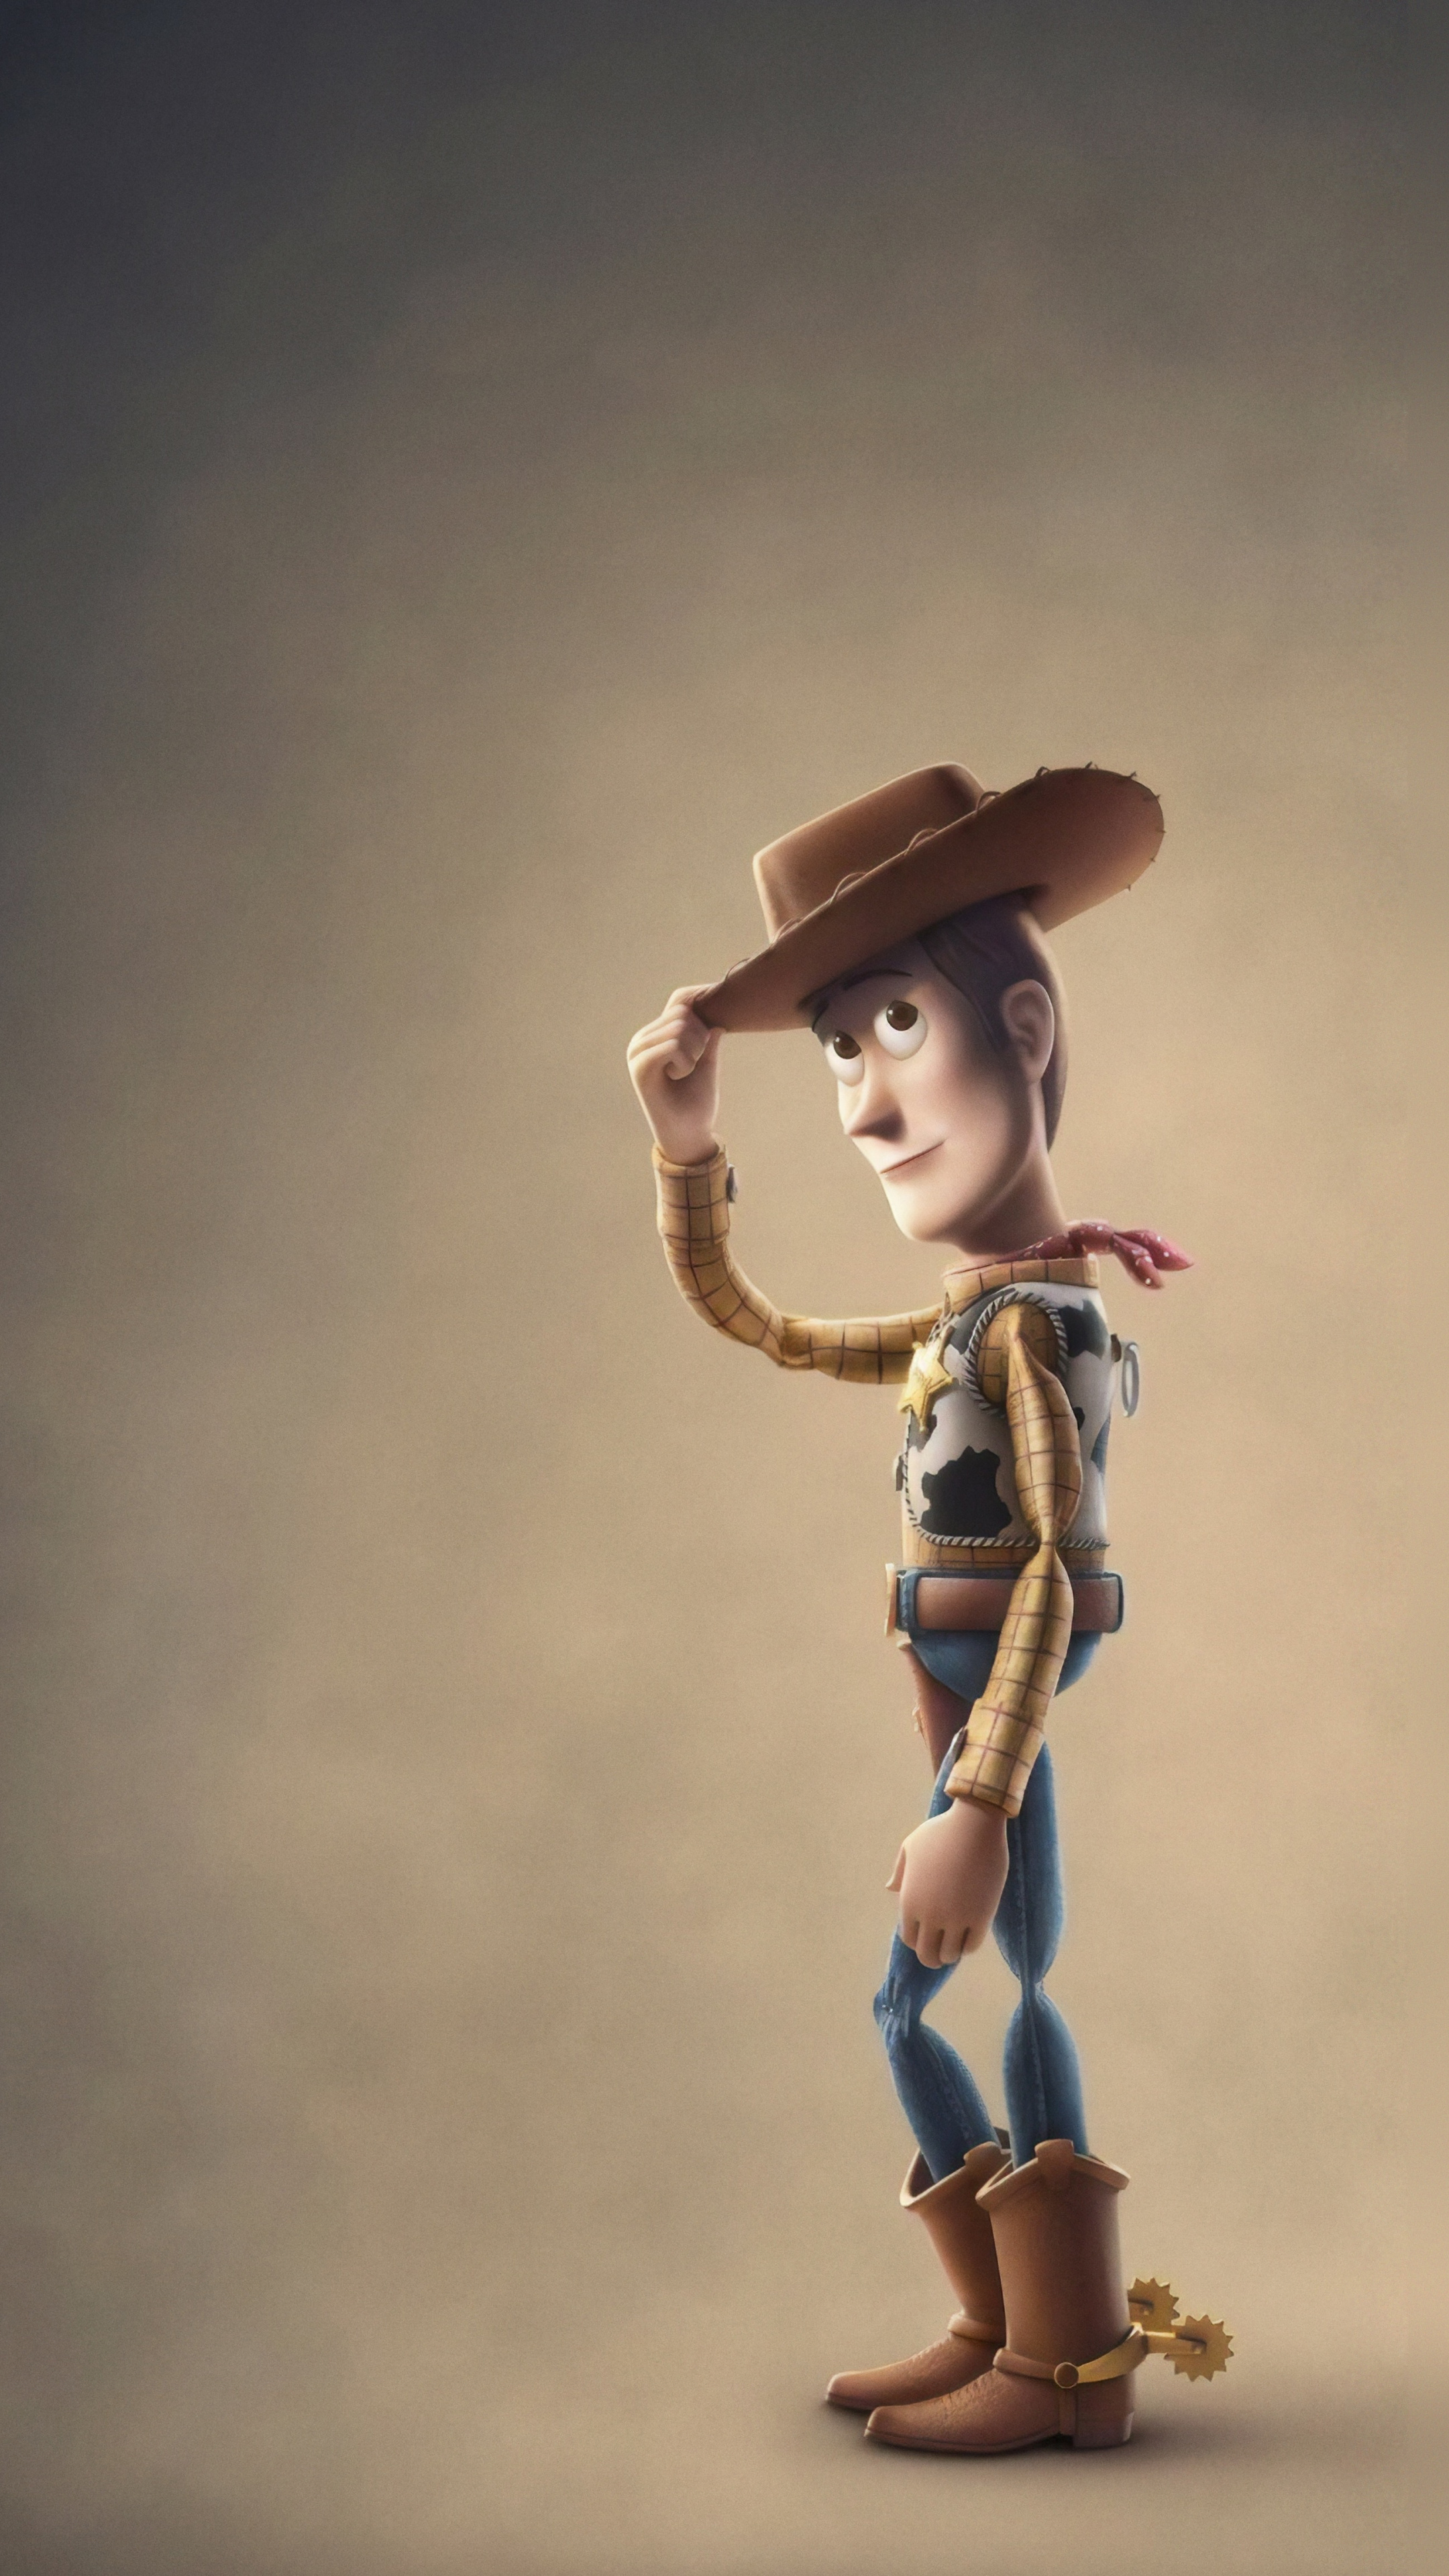 Toy Story 4, Woody, Animation Movie, Pixar, Wallpaper - HD Wallpaper 